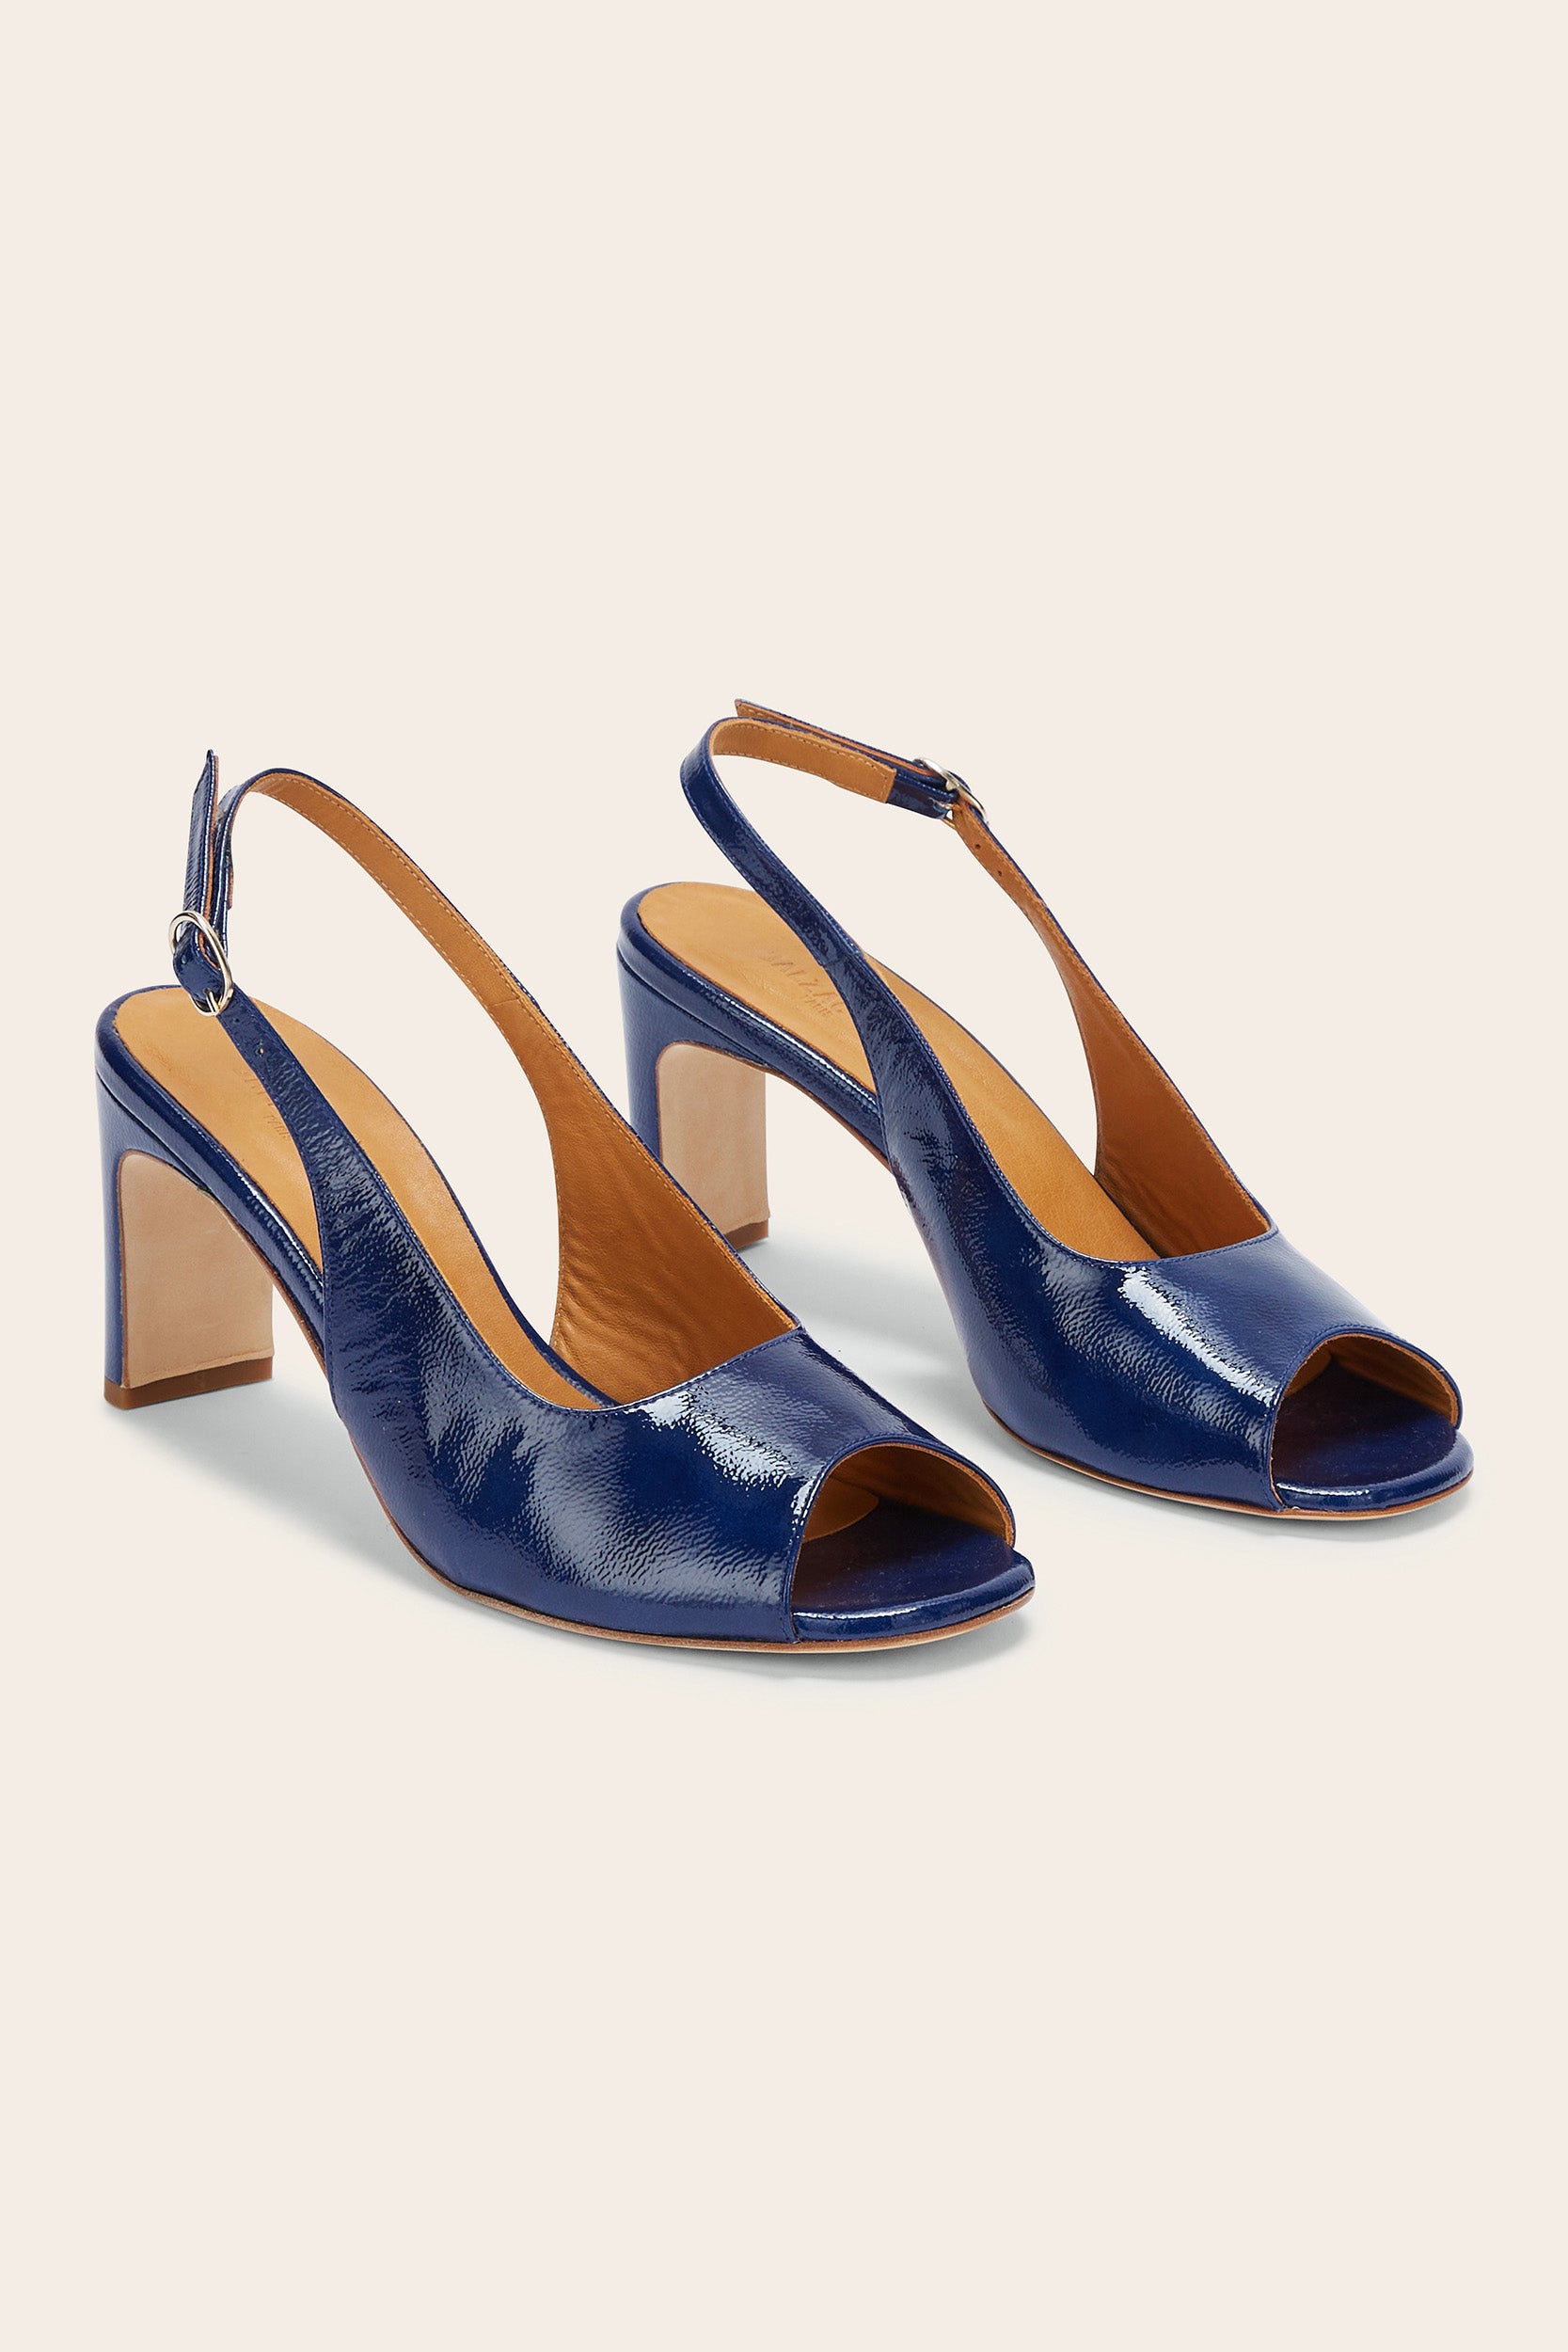 Ode midnight blue crinkled patent pumps